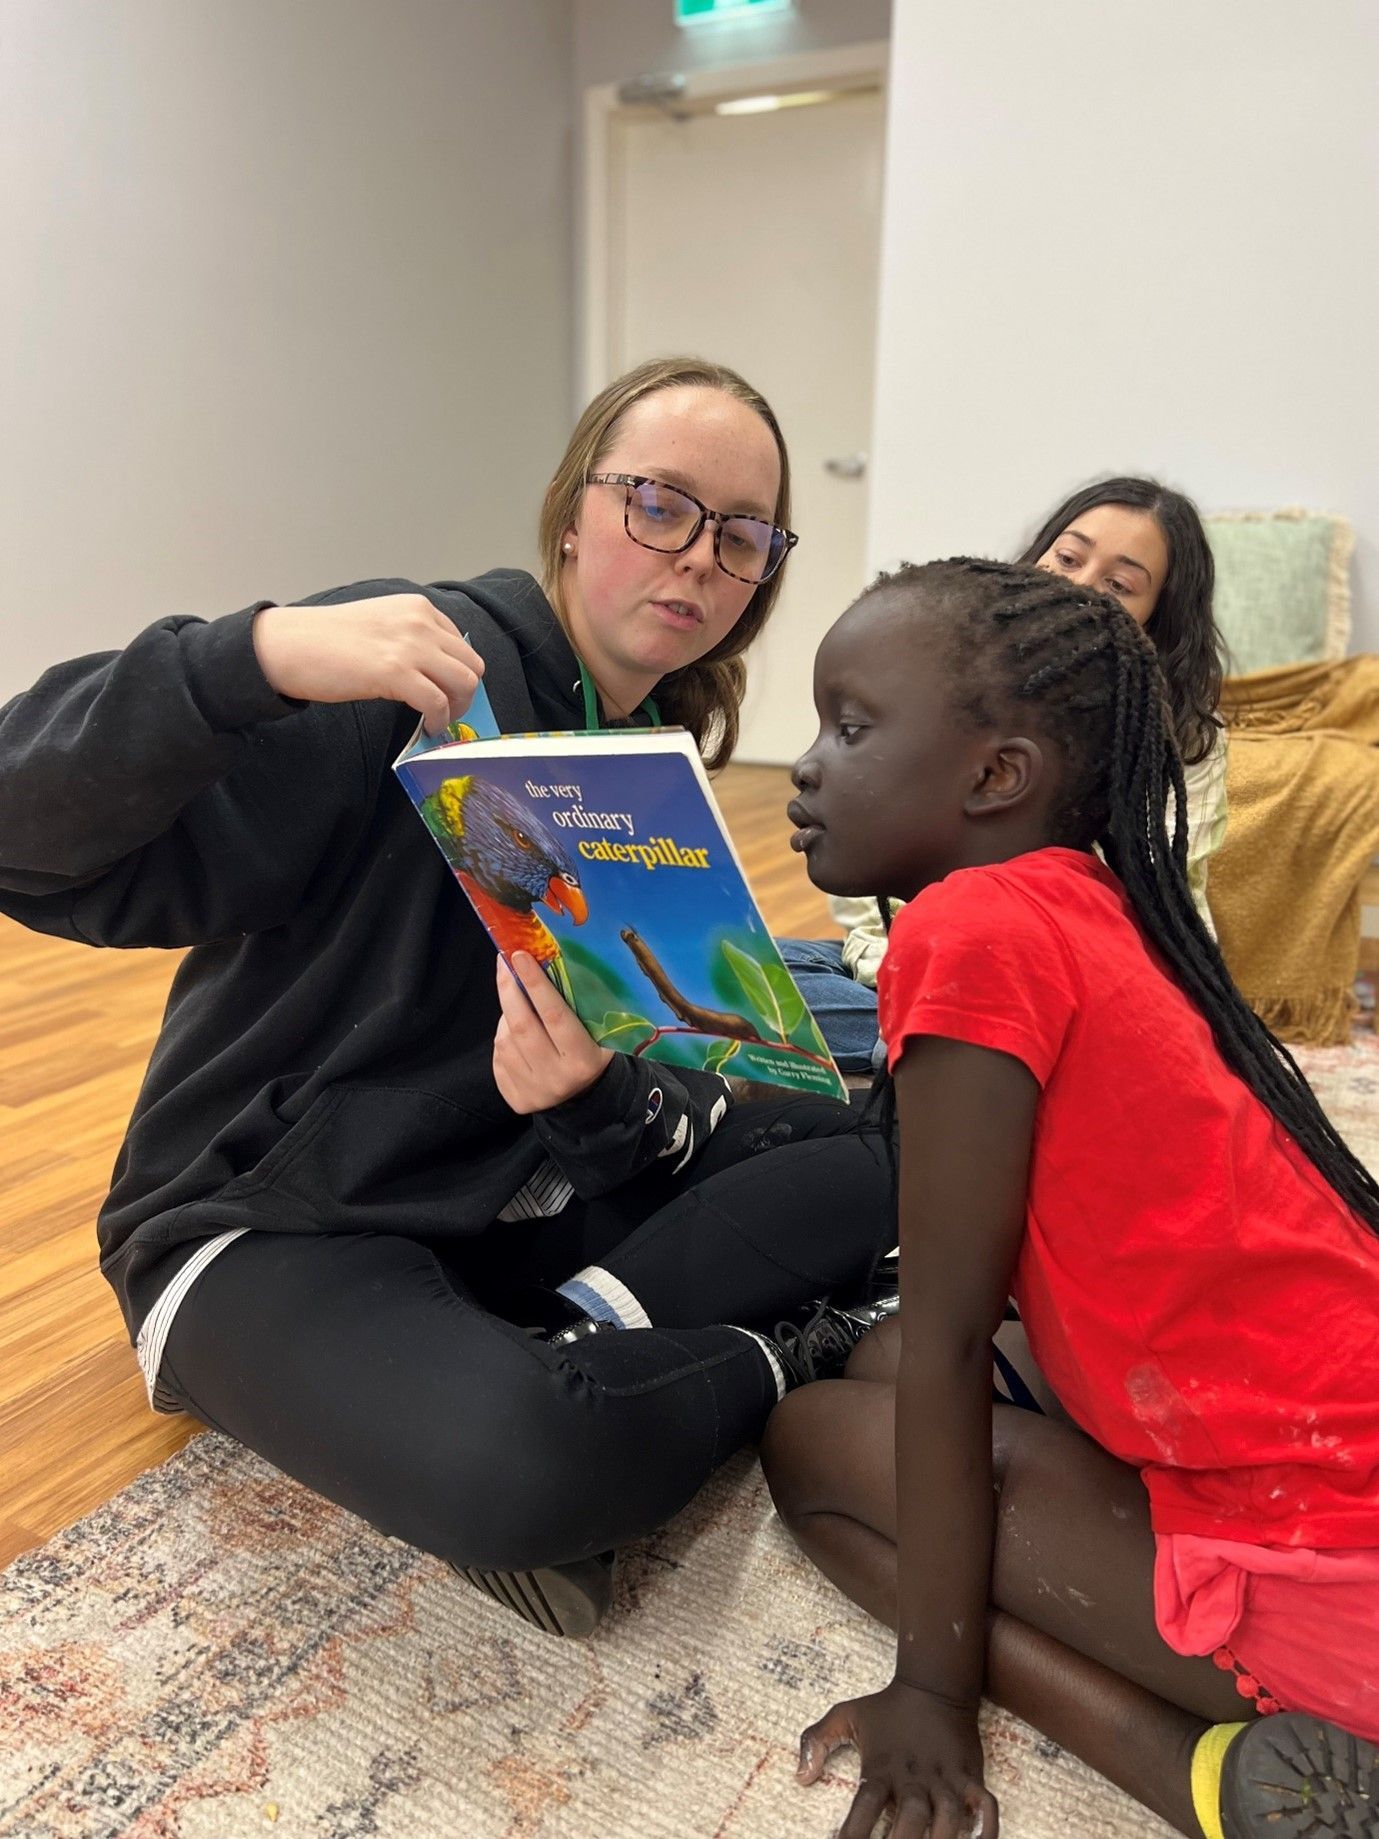 A woman is sitting on the floor reading a book to a young girl.